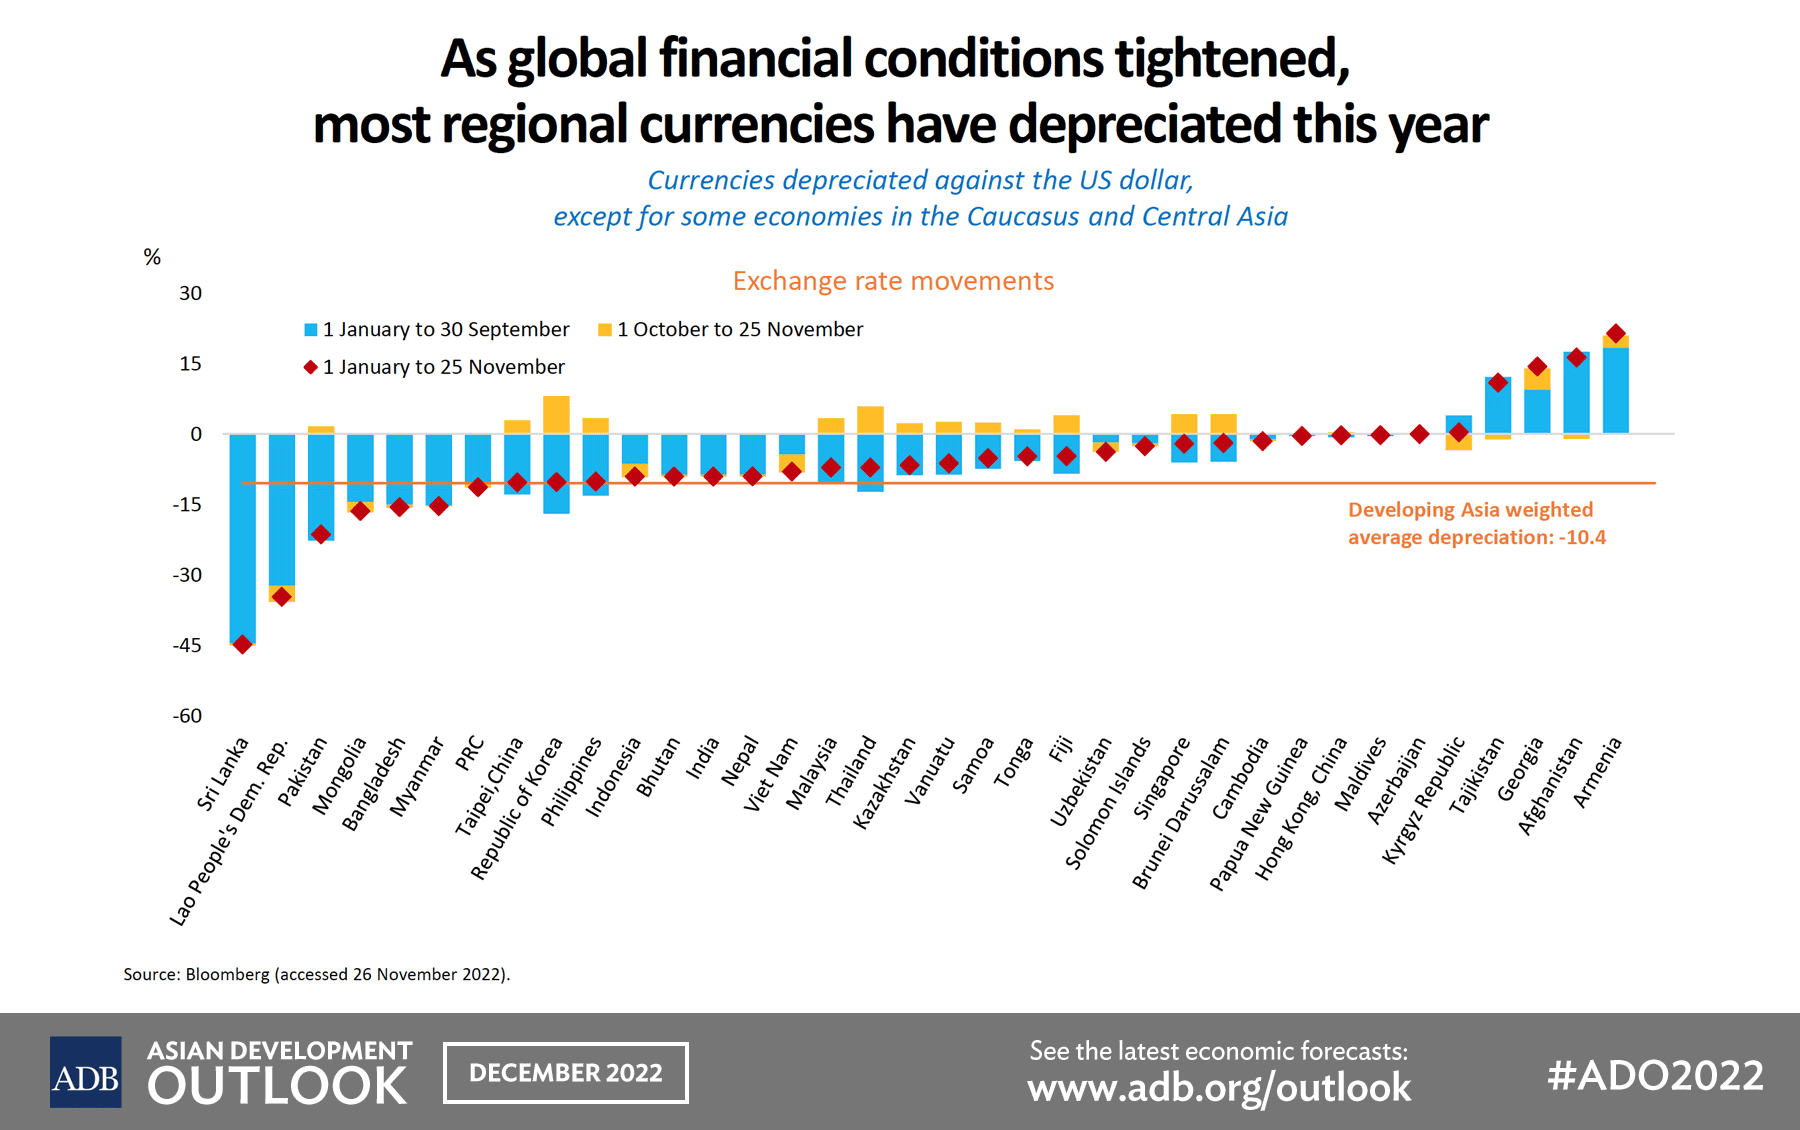 As global financial conditions tightened, most regional currencies have depreciated this year